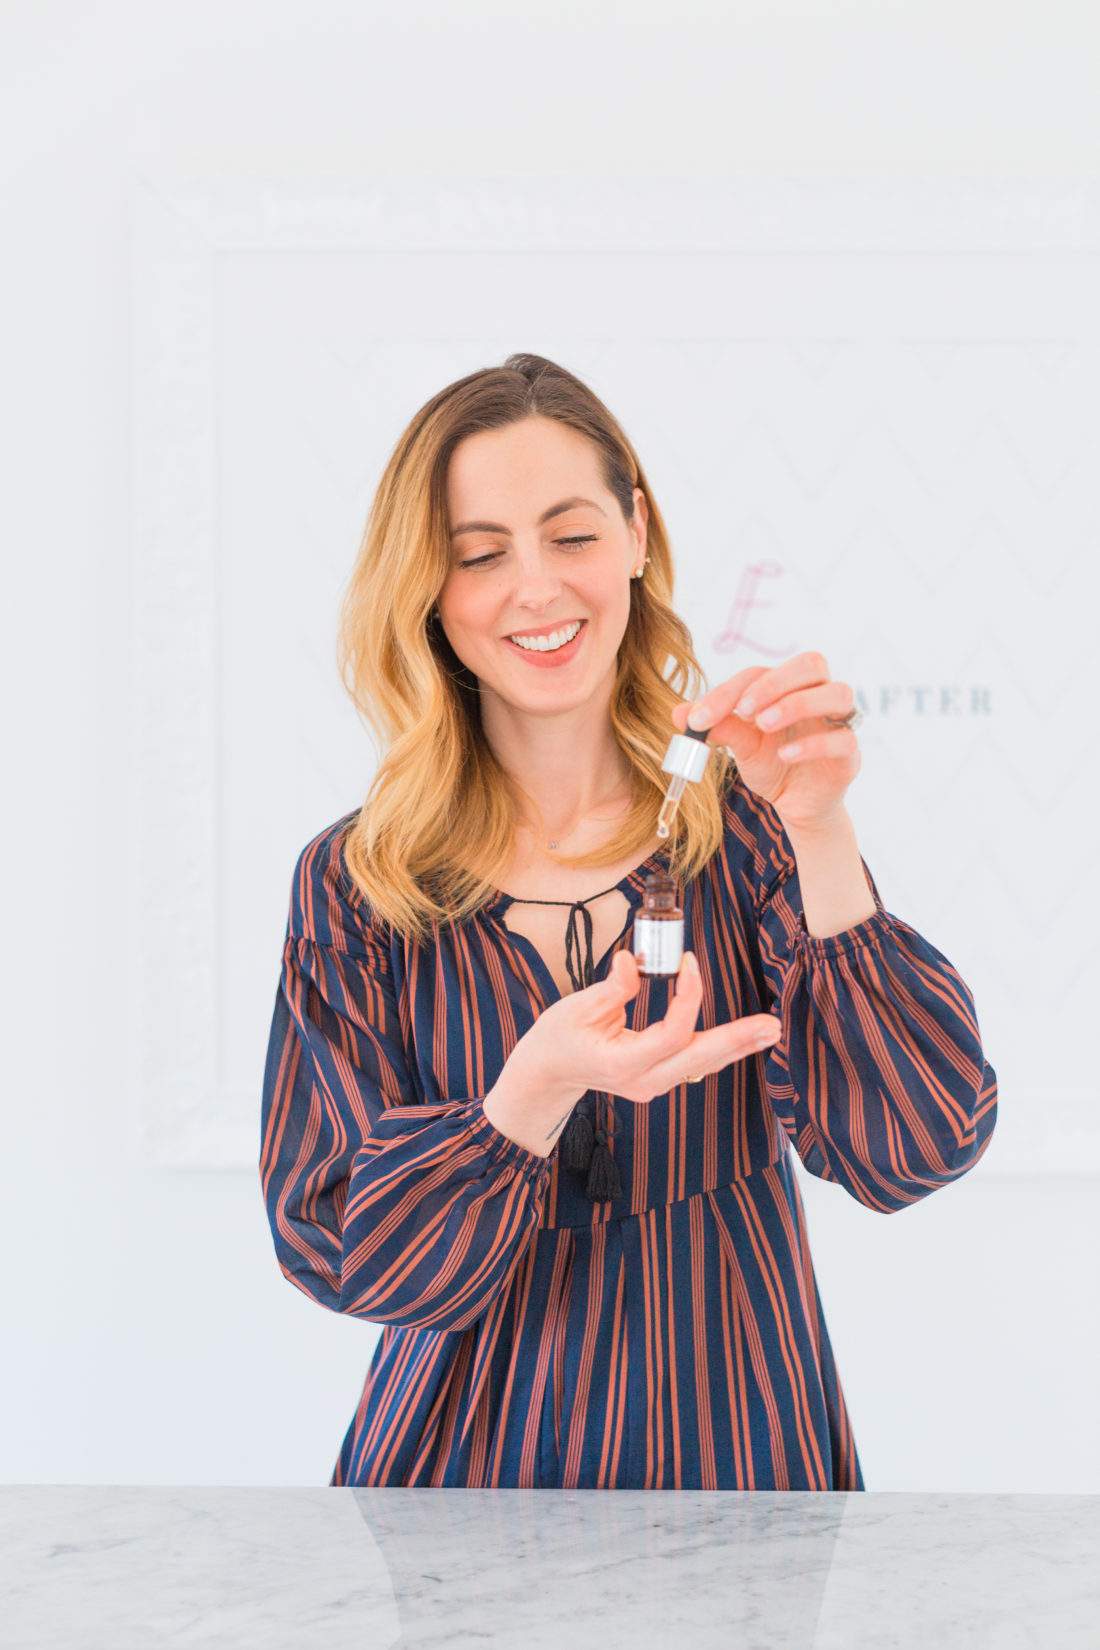 Eva Amurri Martino applies several drops of vitamin c serum to her palms before applying to her face